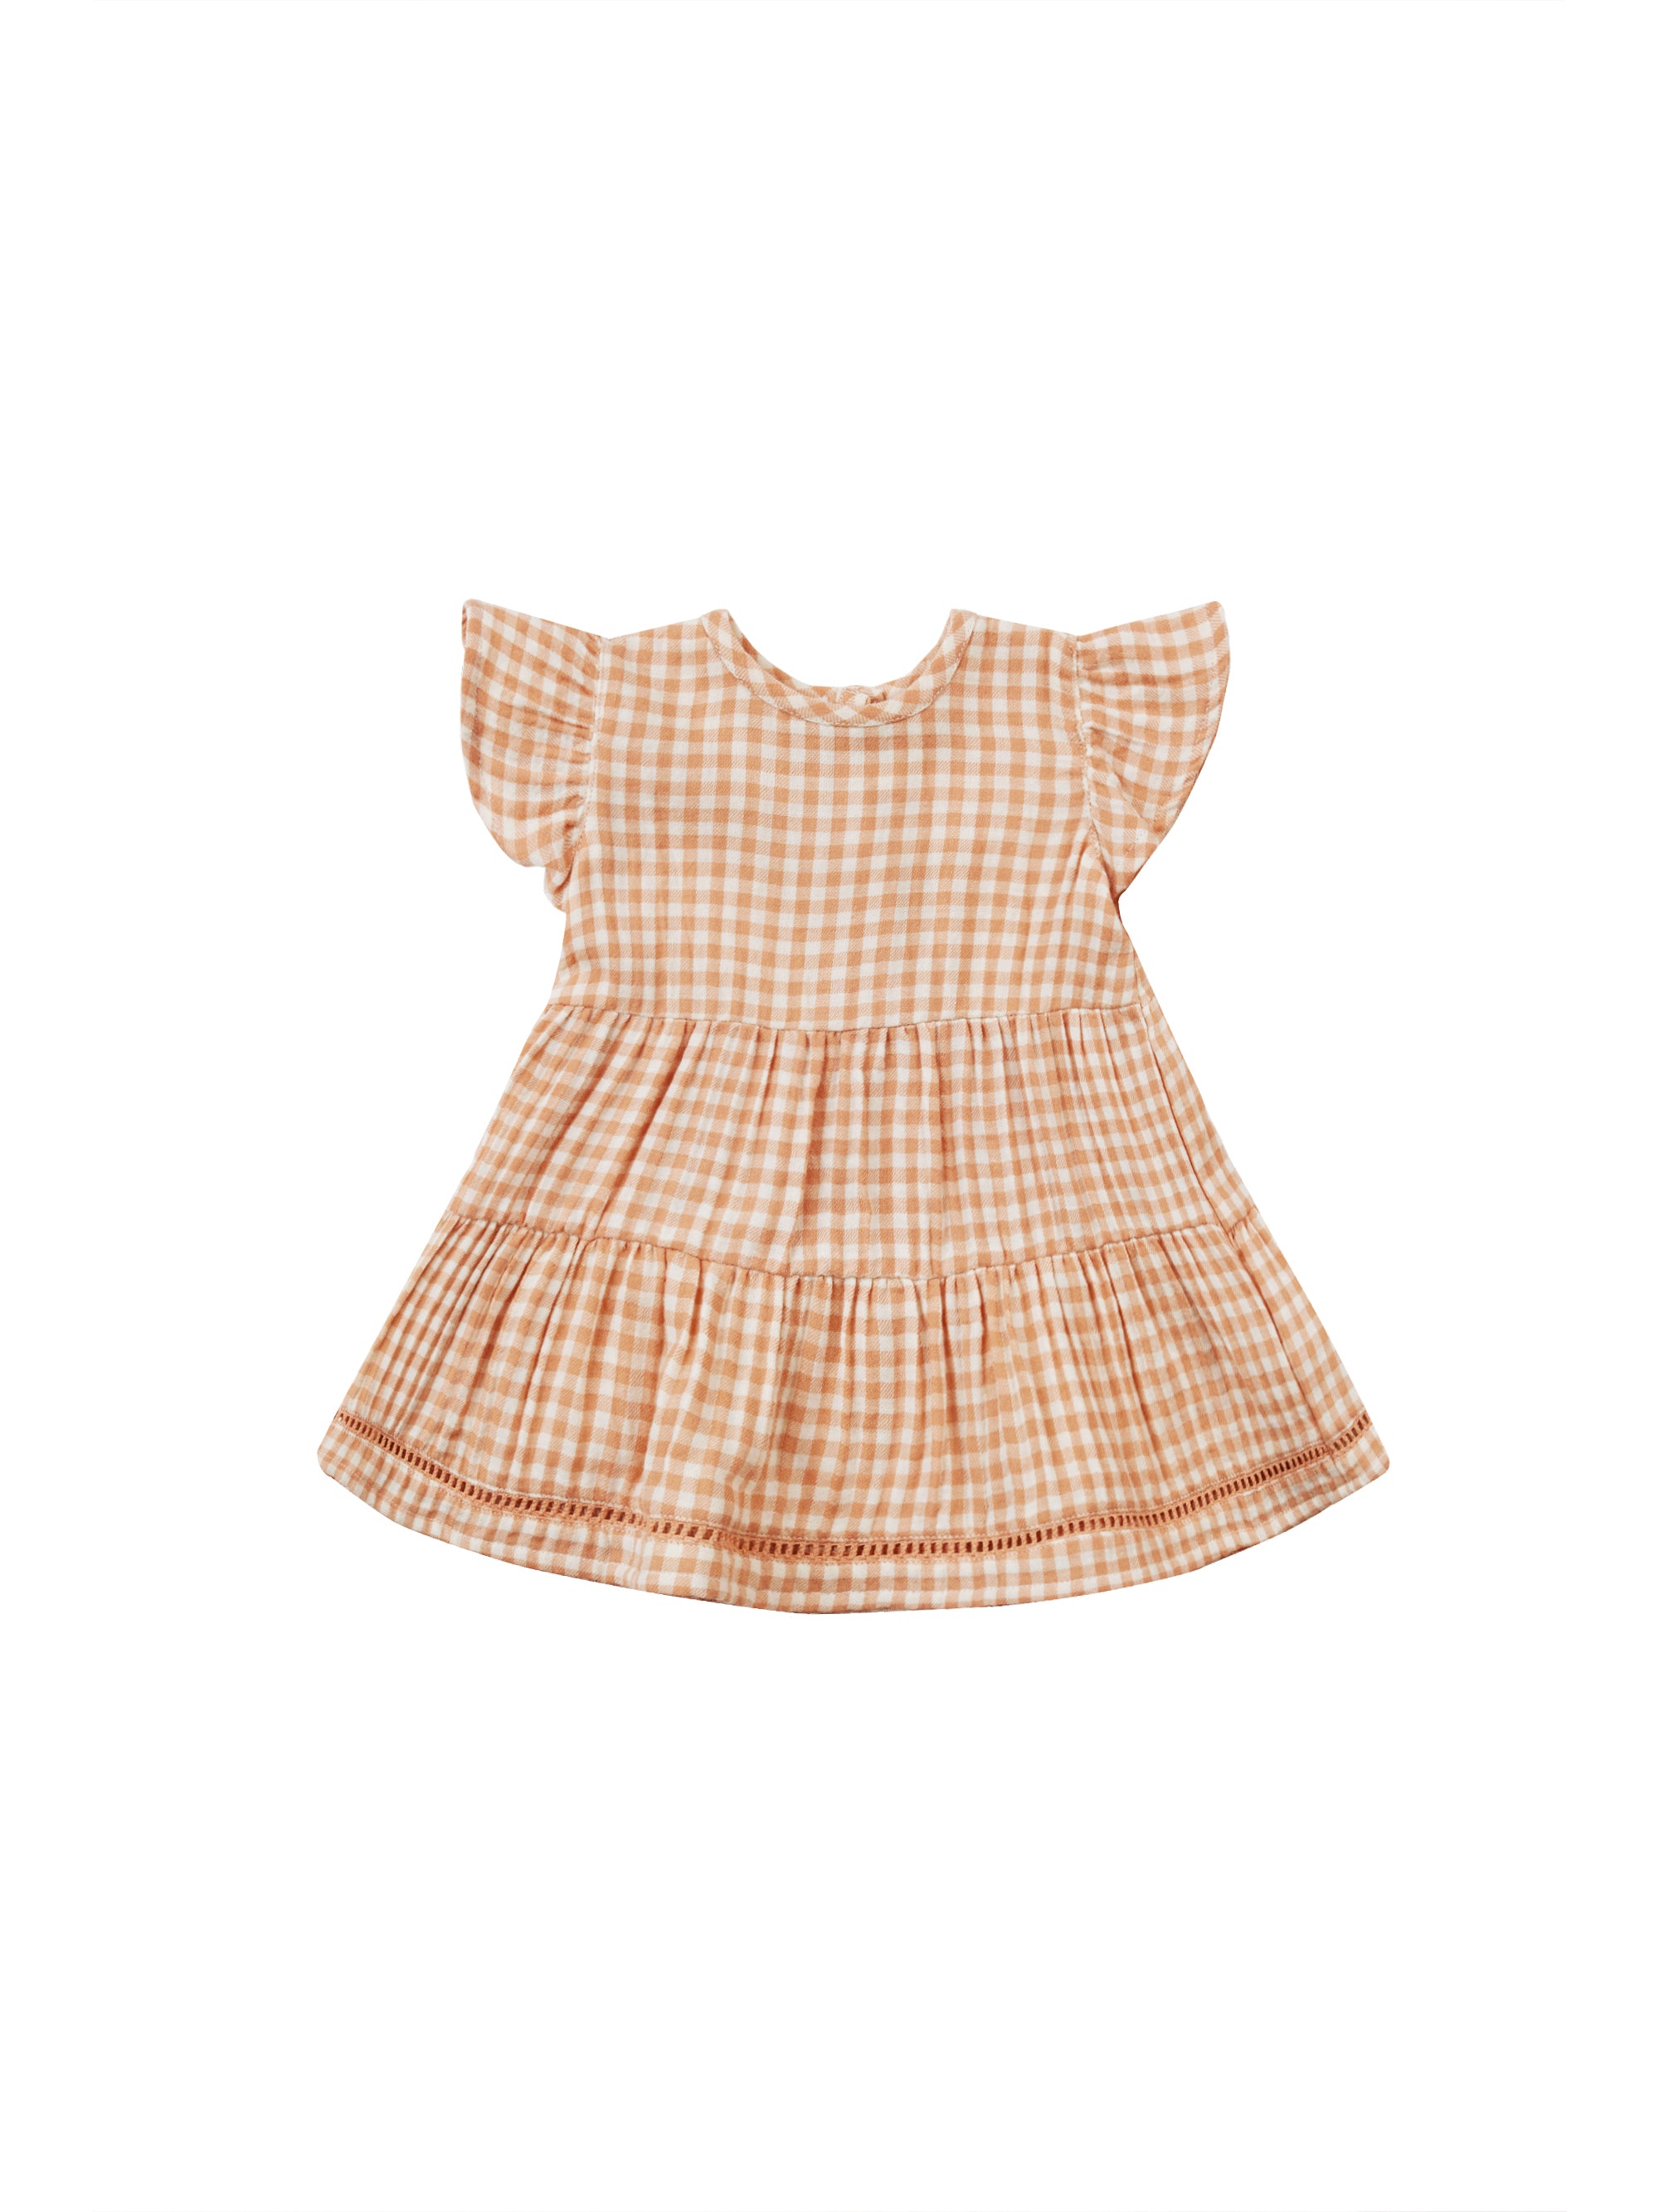 Quincy Mae Lily Dress Melon Gingham